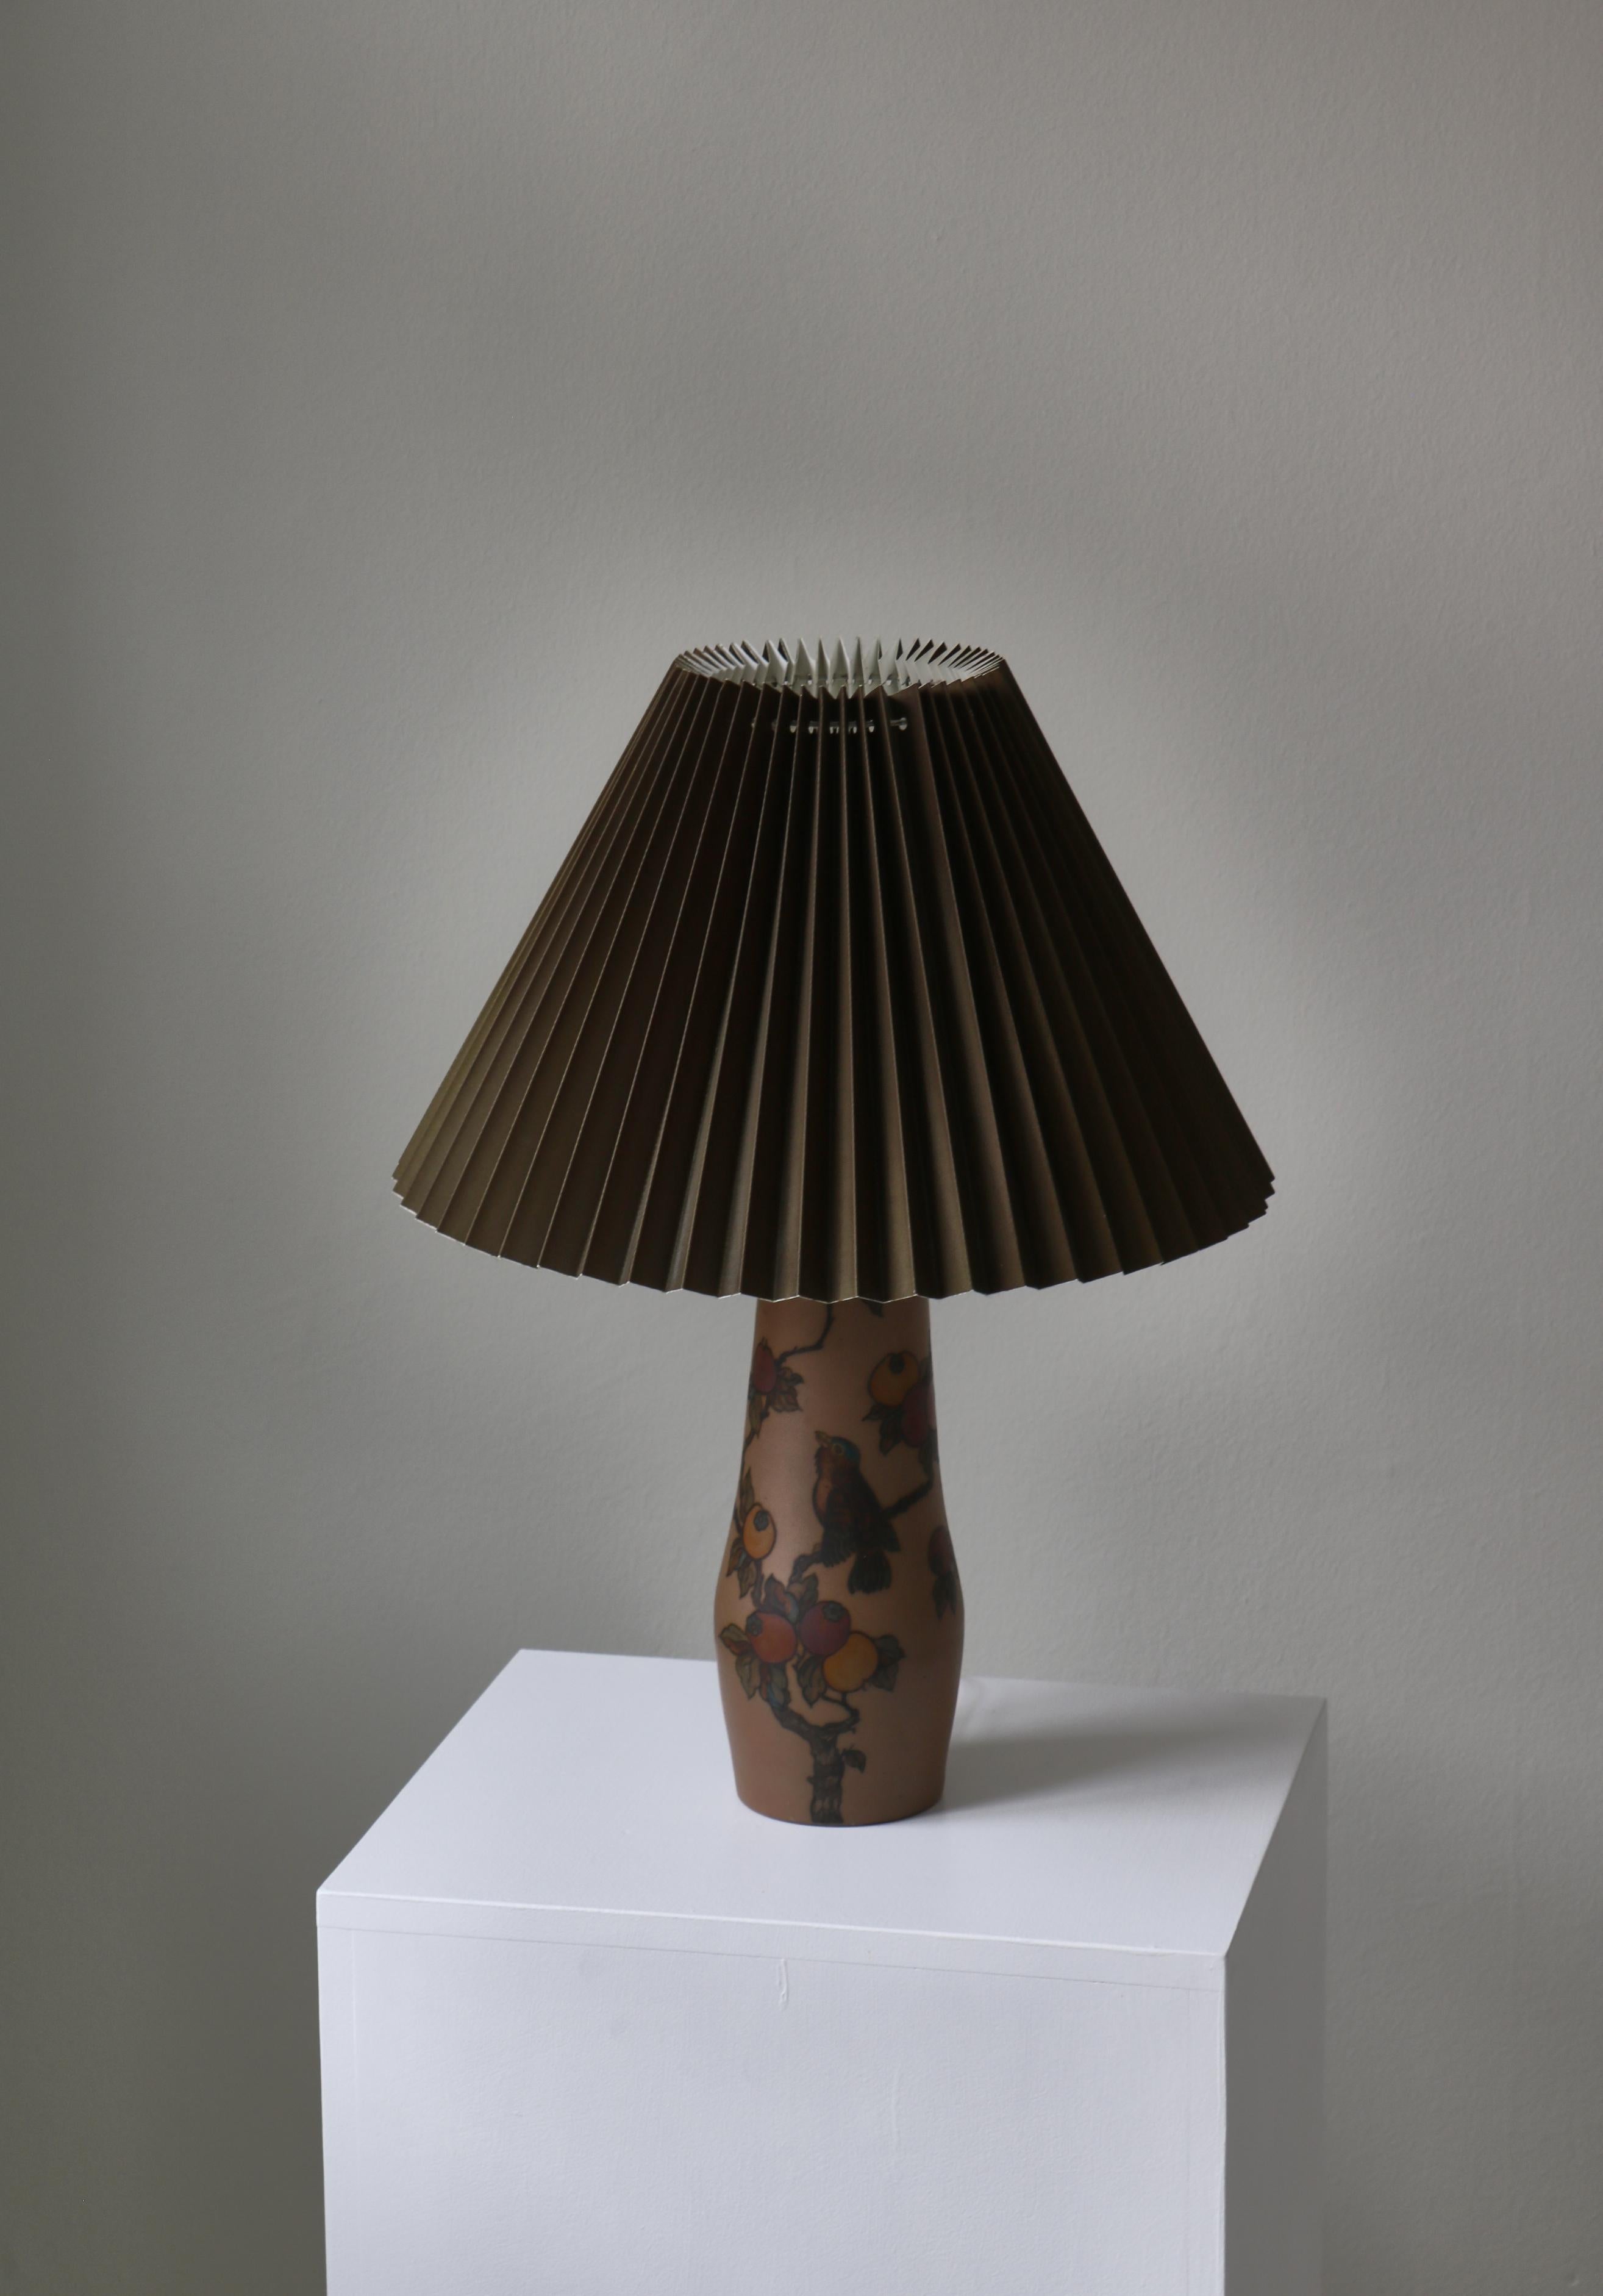 Mid-20th Century Art Nouveau Ceramics Table Lamp Hand Decorated at L. Hjort, Denmark, 1930s For Sale